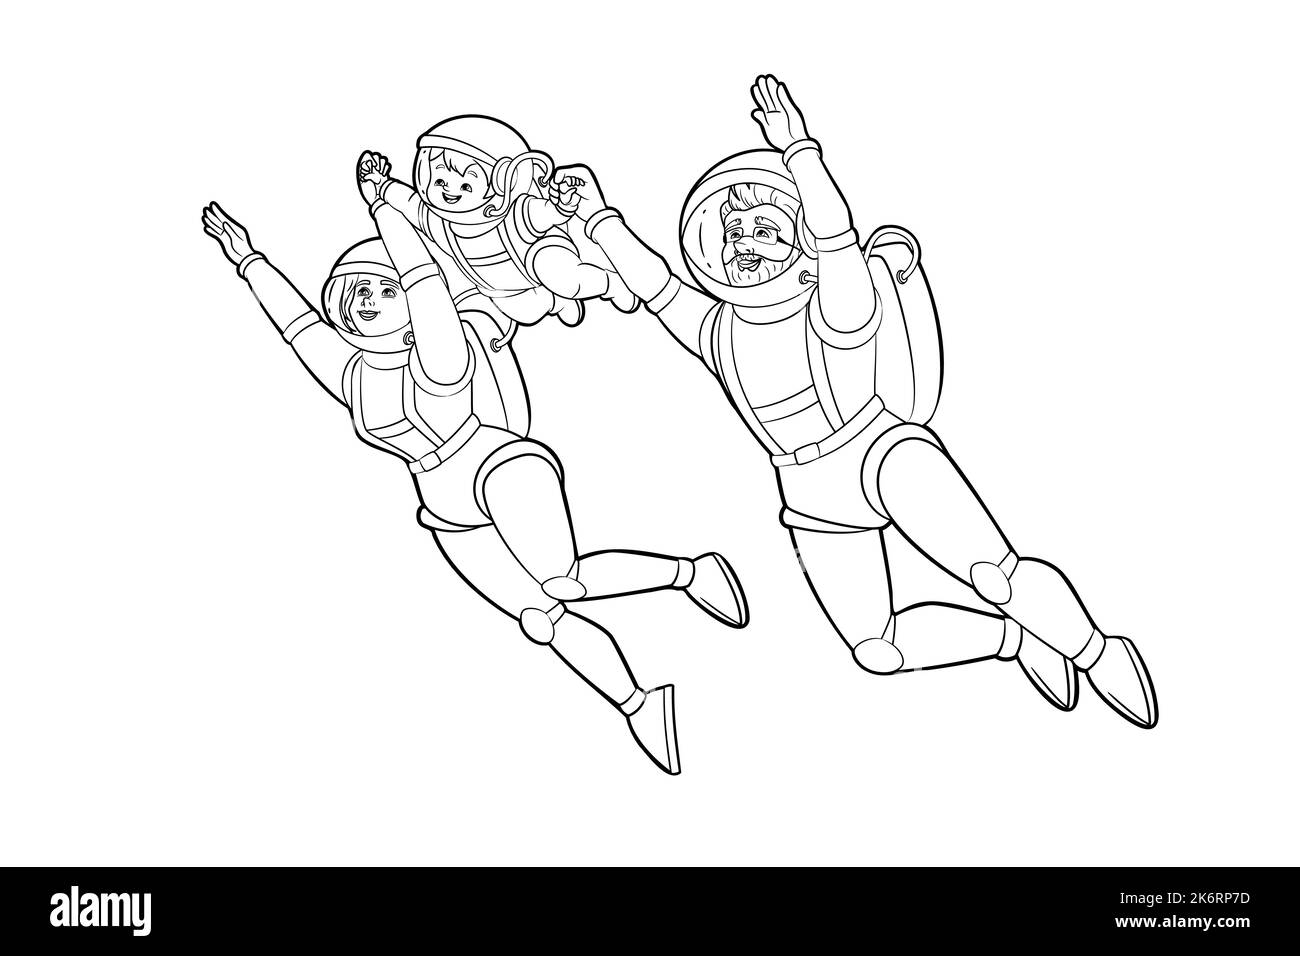 Superman astronaut family flying through the air holding hands.Vector black and white illustration, coloring book, outline Stock Vector